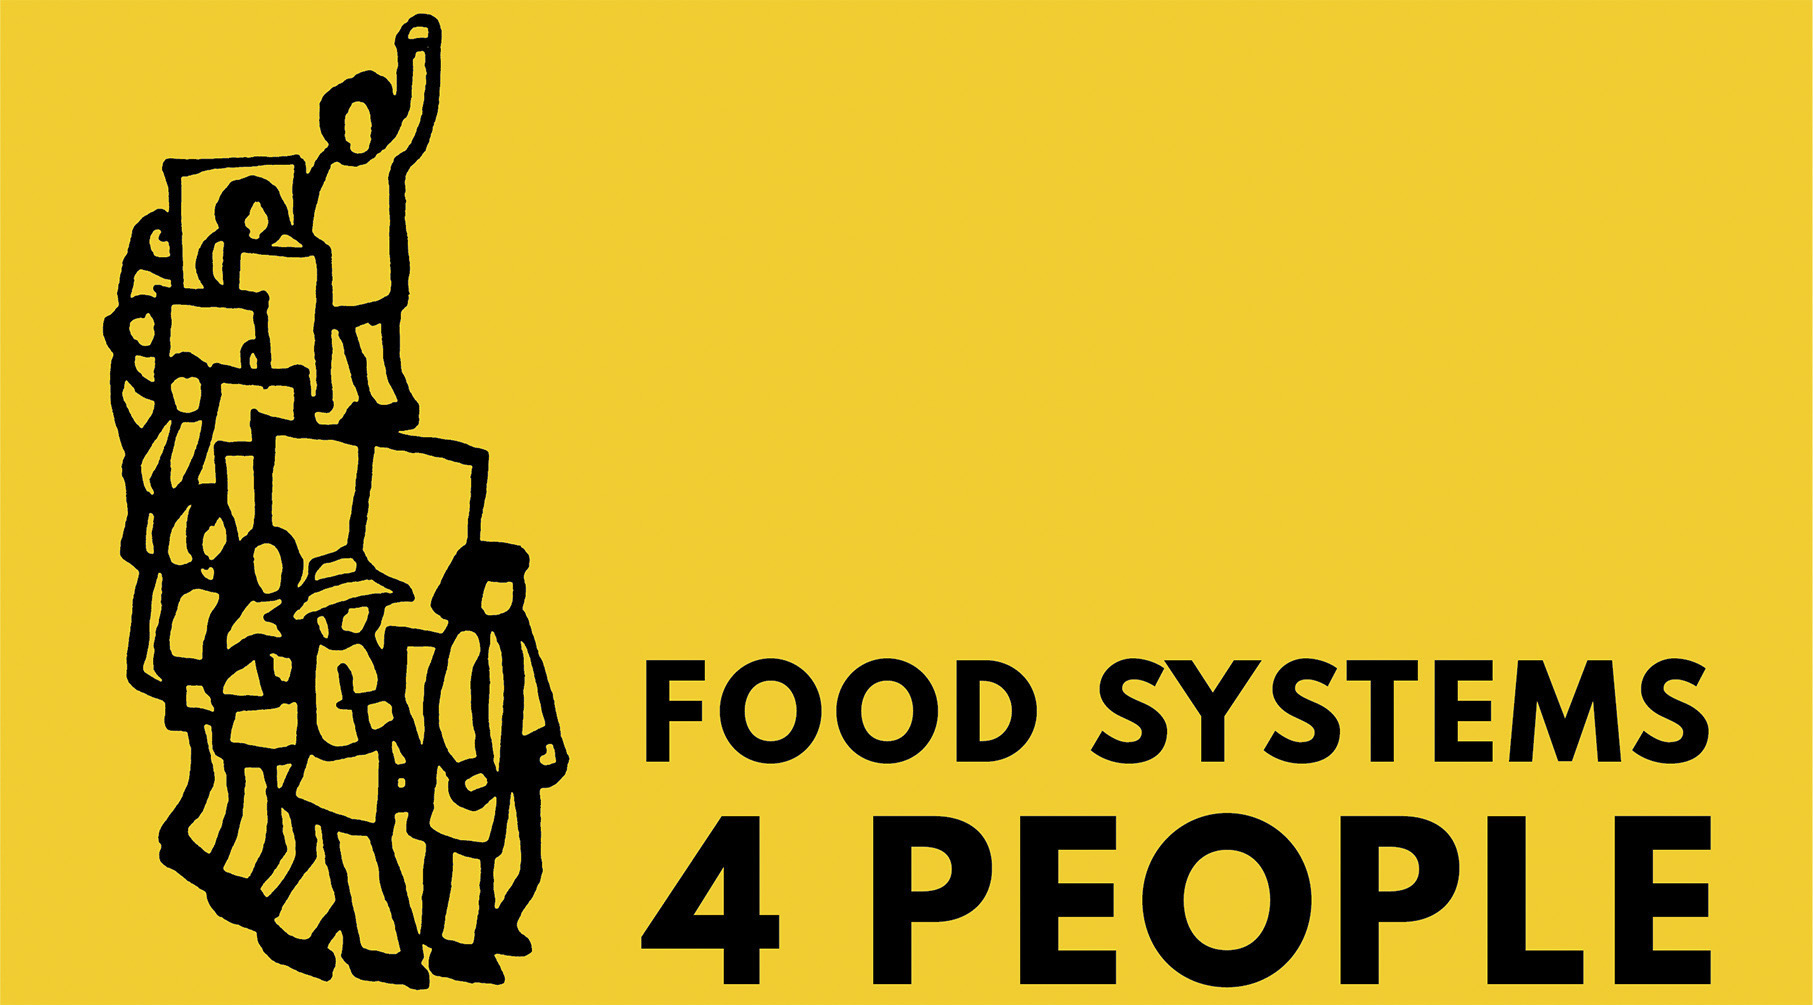 MAVERICK CITIZEN OP-ED: Corporate interests calling the shots at UN Food Systems Summit